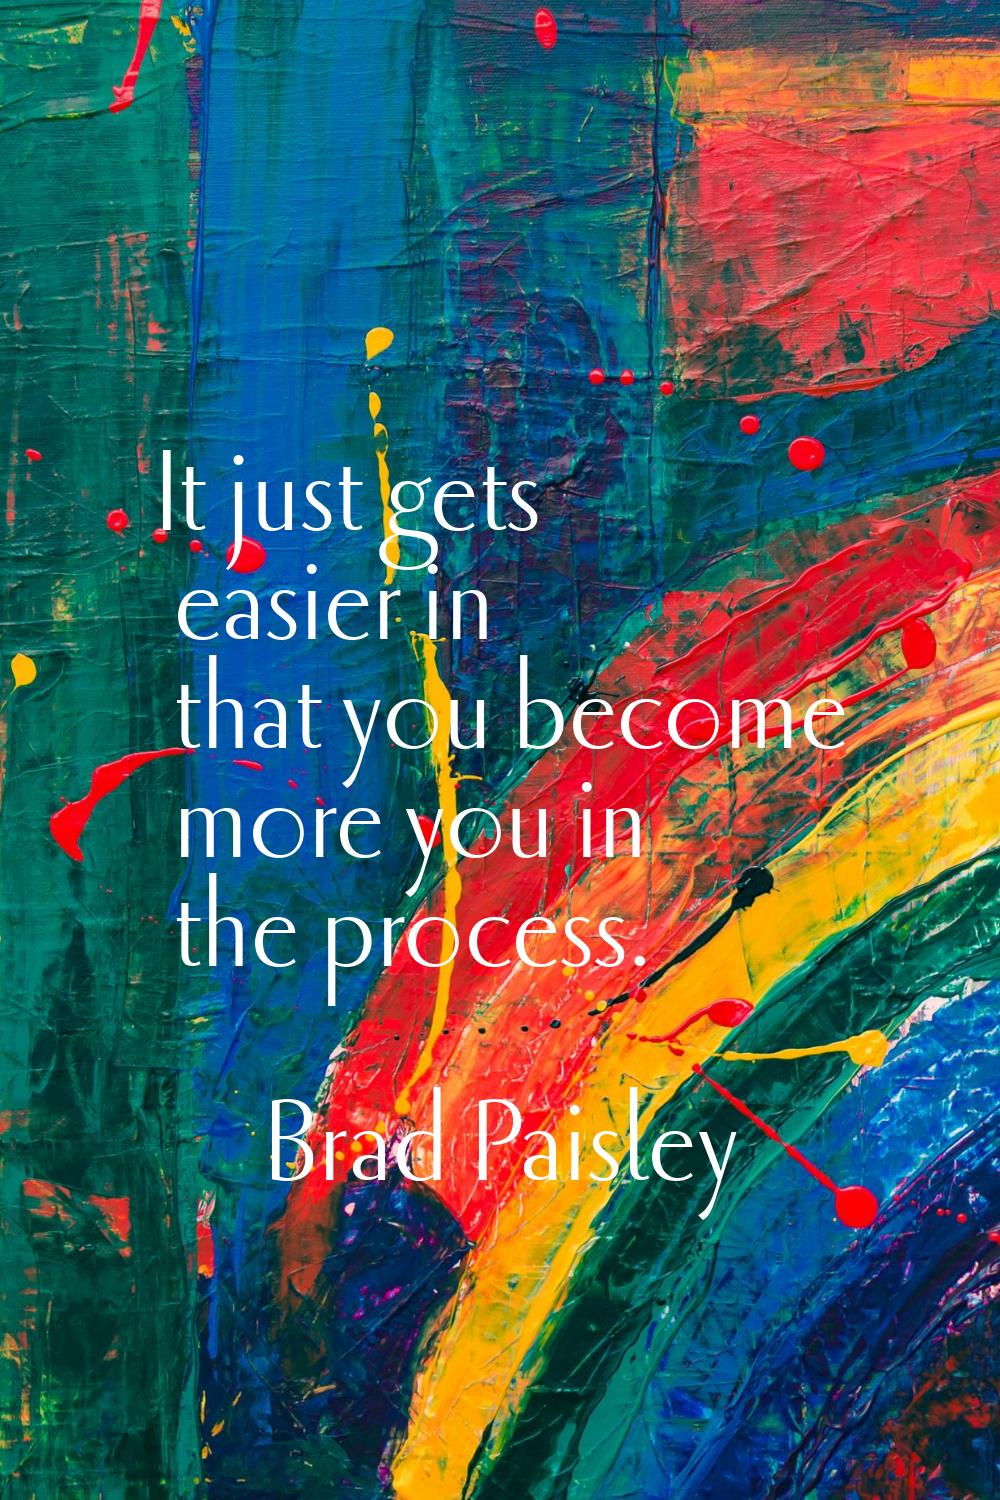 It just gets easier in that you become more you in the process.